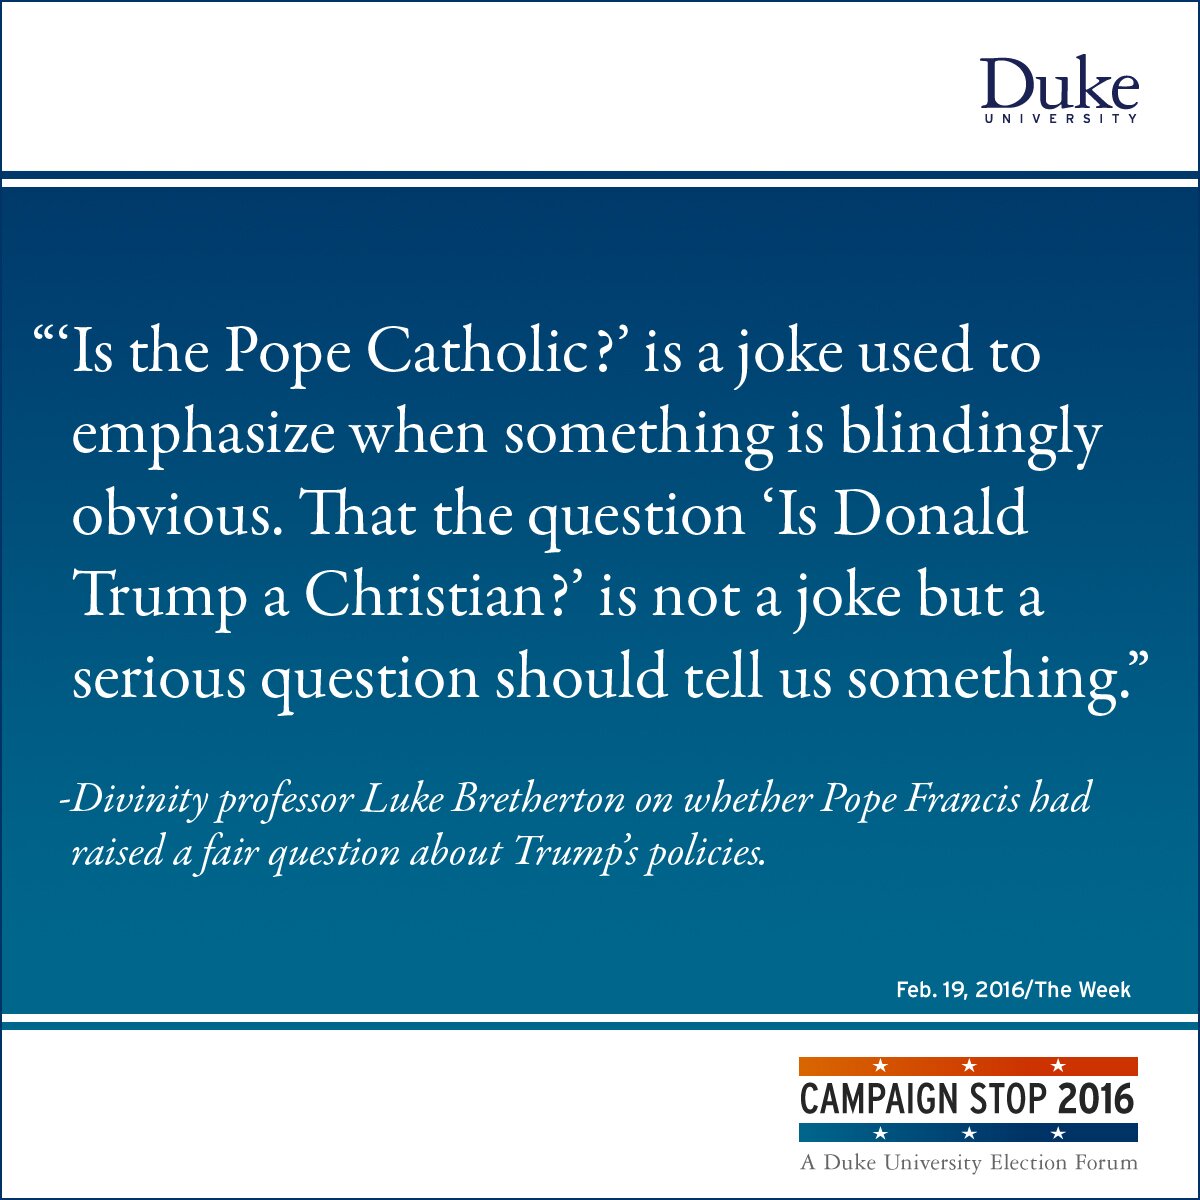 “‘Is the Pope Catholic?’ is a joke used to emphasize when something is blindingly obvious. That the question ‘Is Donald Trump a Christian?’ is not a joke but a serious question should tell us something.” -Divinity professor Luke Bretherton on whether Pope Francis had raised a fair question about Trump’s policies.